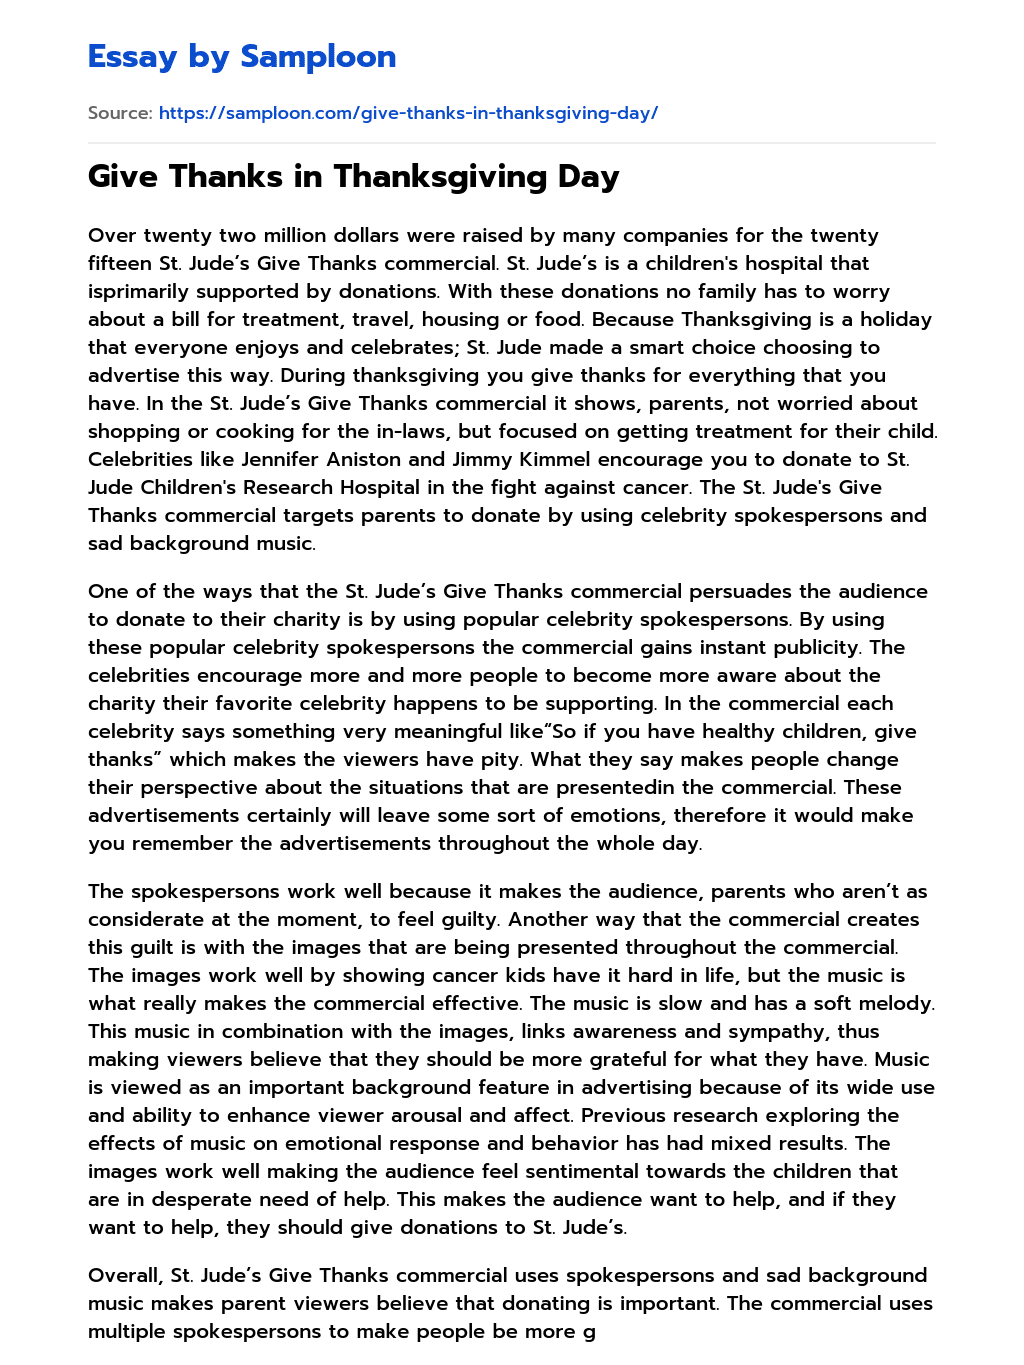 Give Thanks in Thanksgiving Day essay